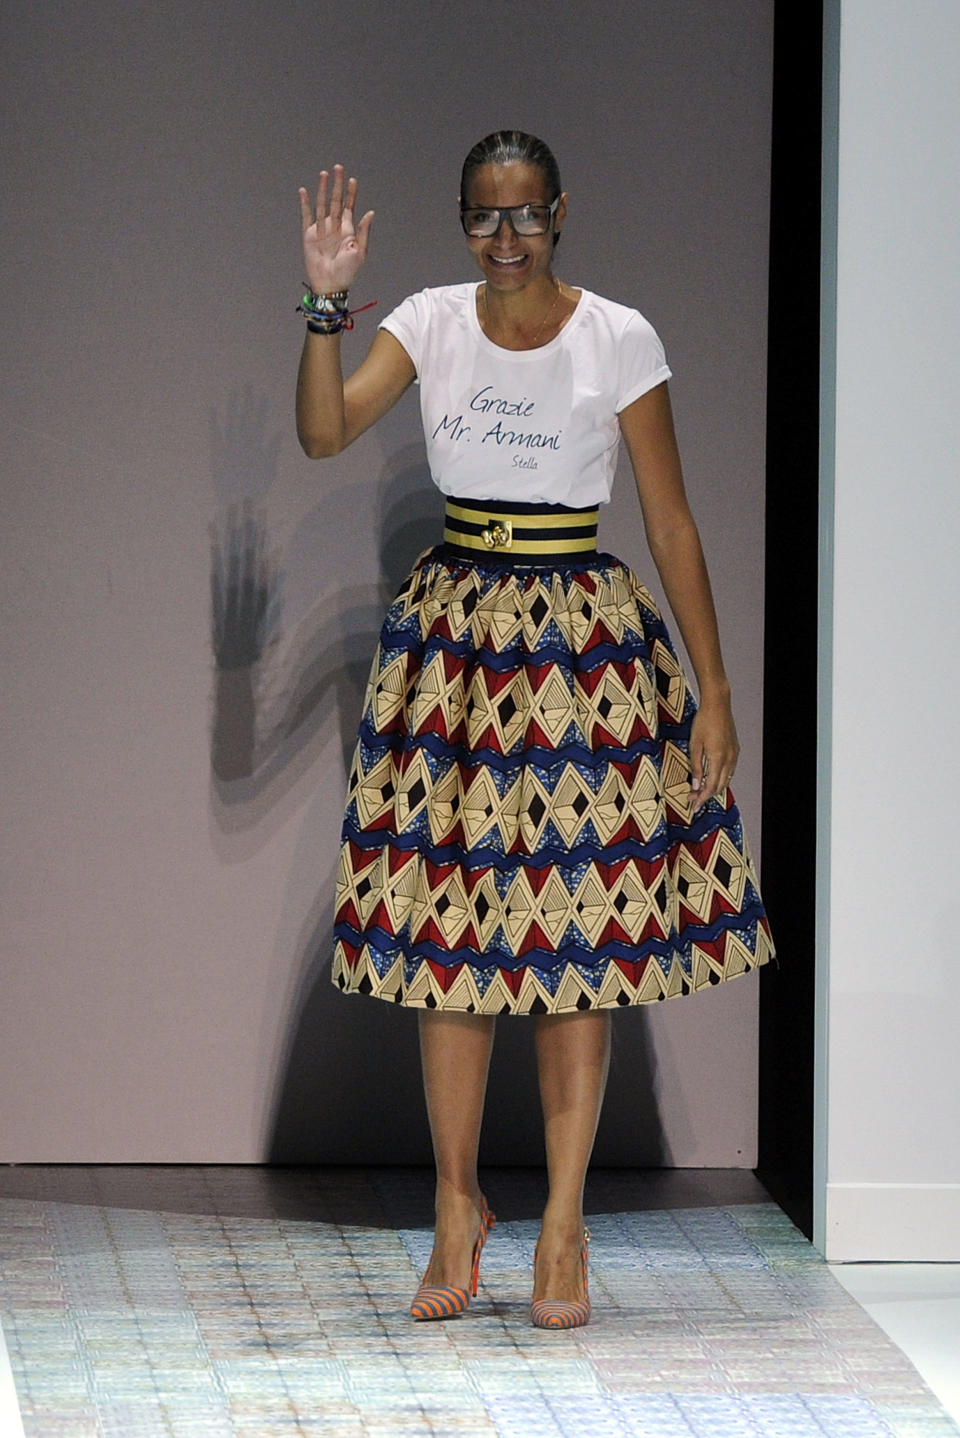 Designer Stella Jean acknowledges the audience as she wears a shirt with writing in Italian reading "Thank you Mr. Armani", at the end of her women's Spring-Summer 2014 collection, part of the Milan Fashion Week, unveiled in Milan, Italy, Saturday, Sept. 21, 2013. Renowned Italian designer Giorgio Armani hosted the fashion show of emerging designer Stella Jean at the Armani Theater, his show space. (AP Photo/Giuseppe Aresu)